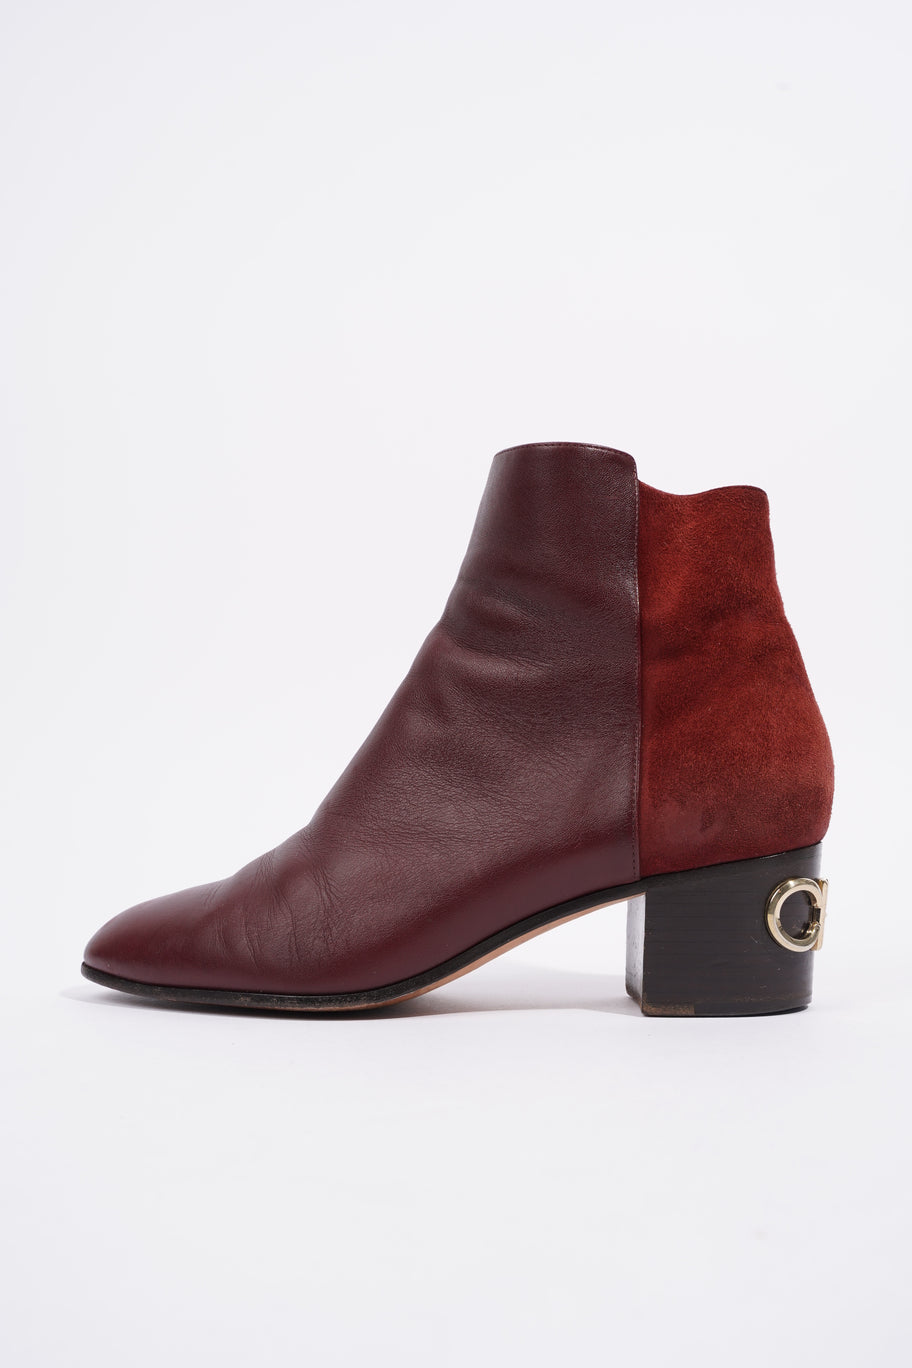 Ankle Boot Red Leather EU 41 UK 8 Image 5